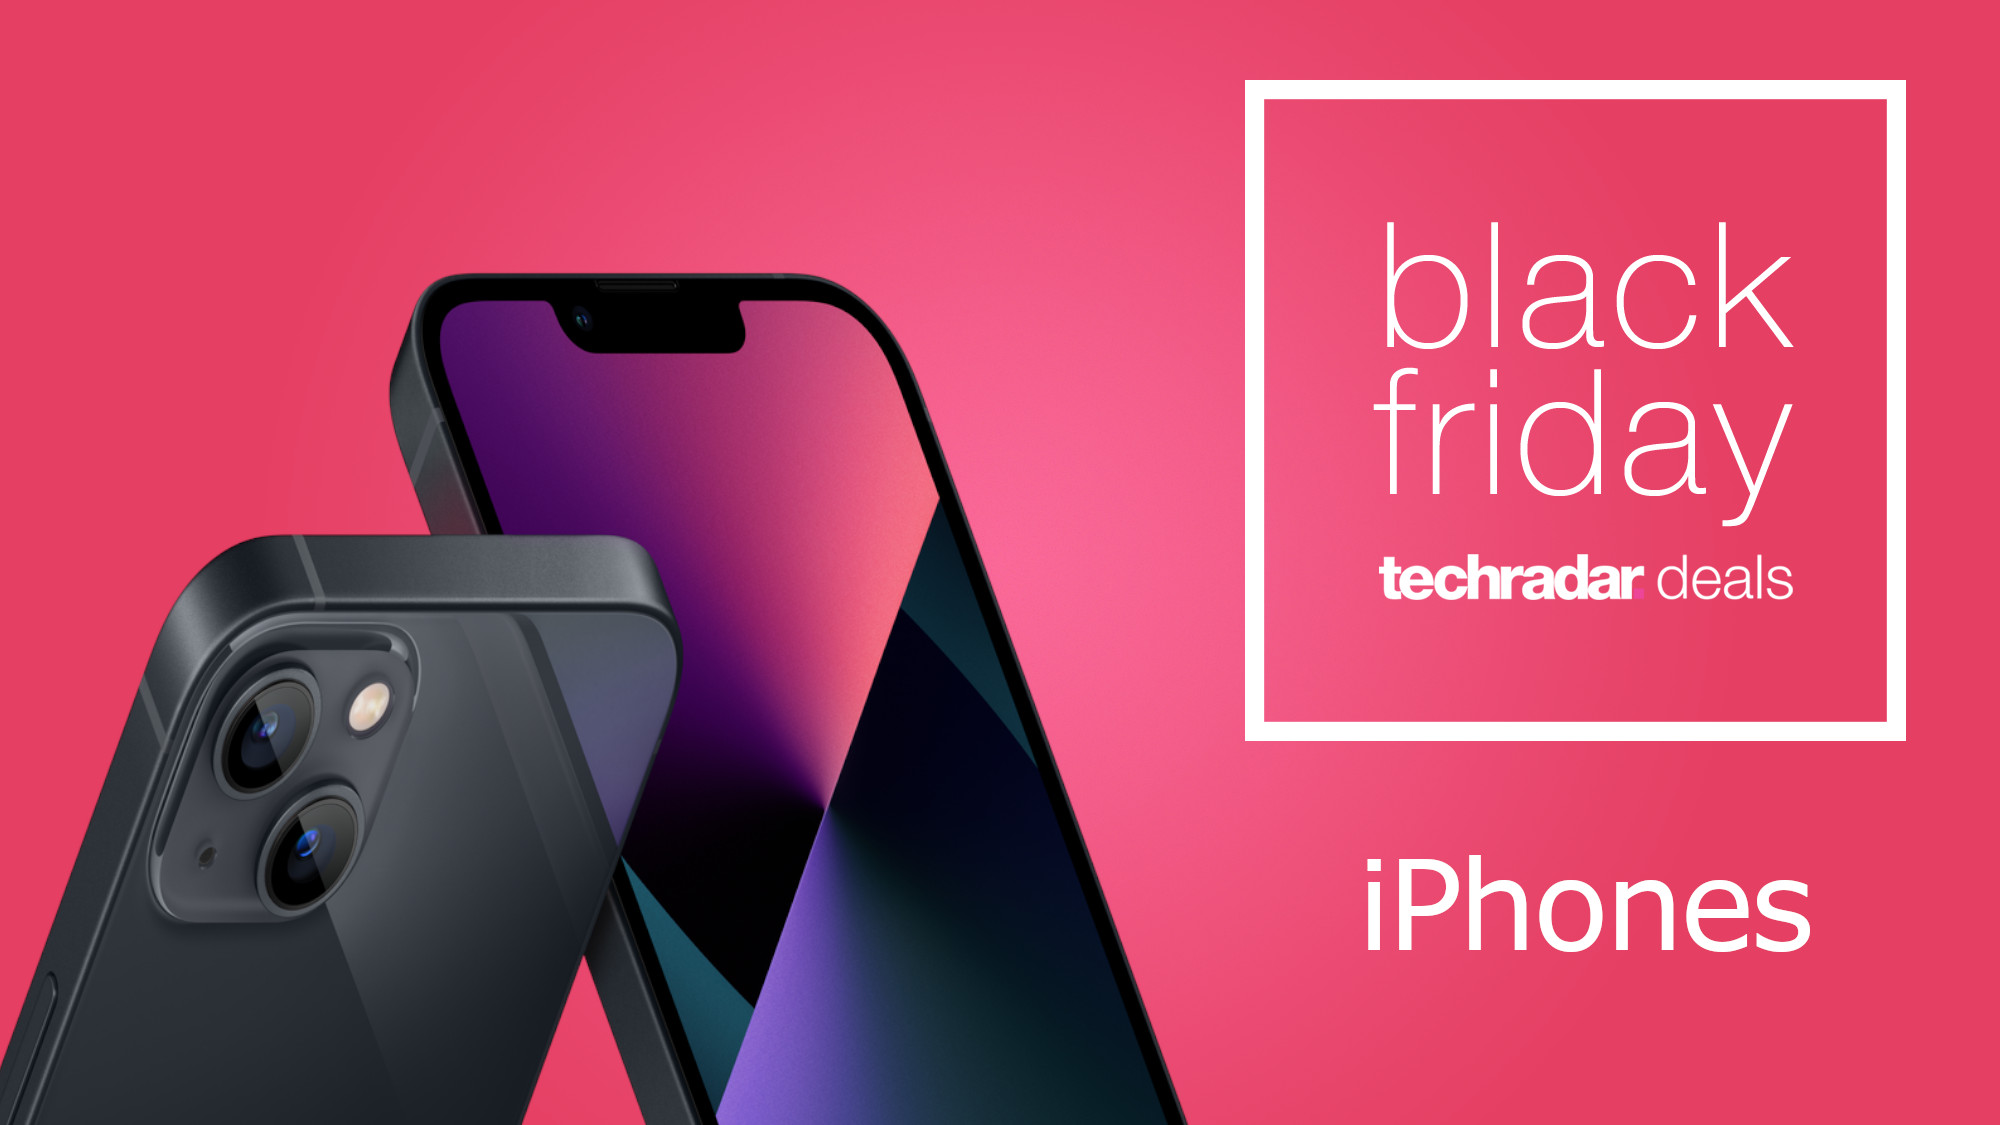 Black Friday Deals on Iphone 11 Pro Max Canada - Vogel Fers1990